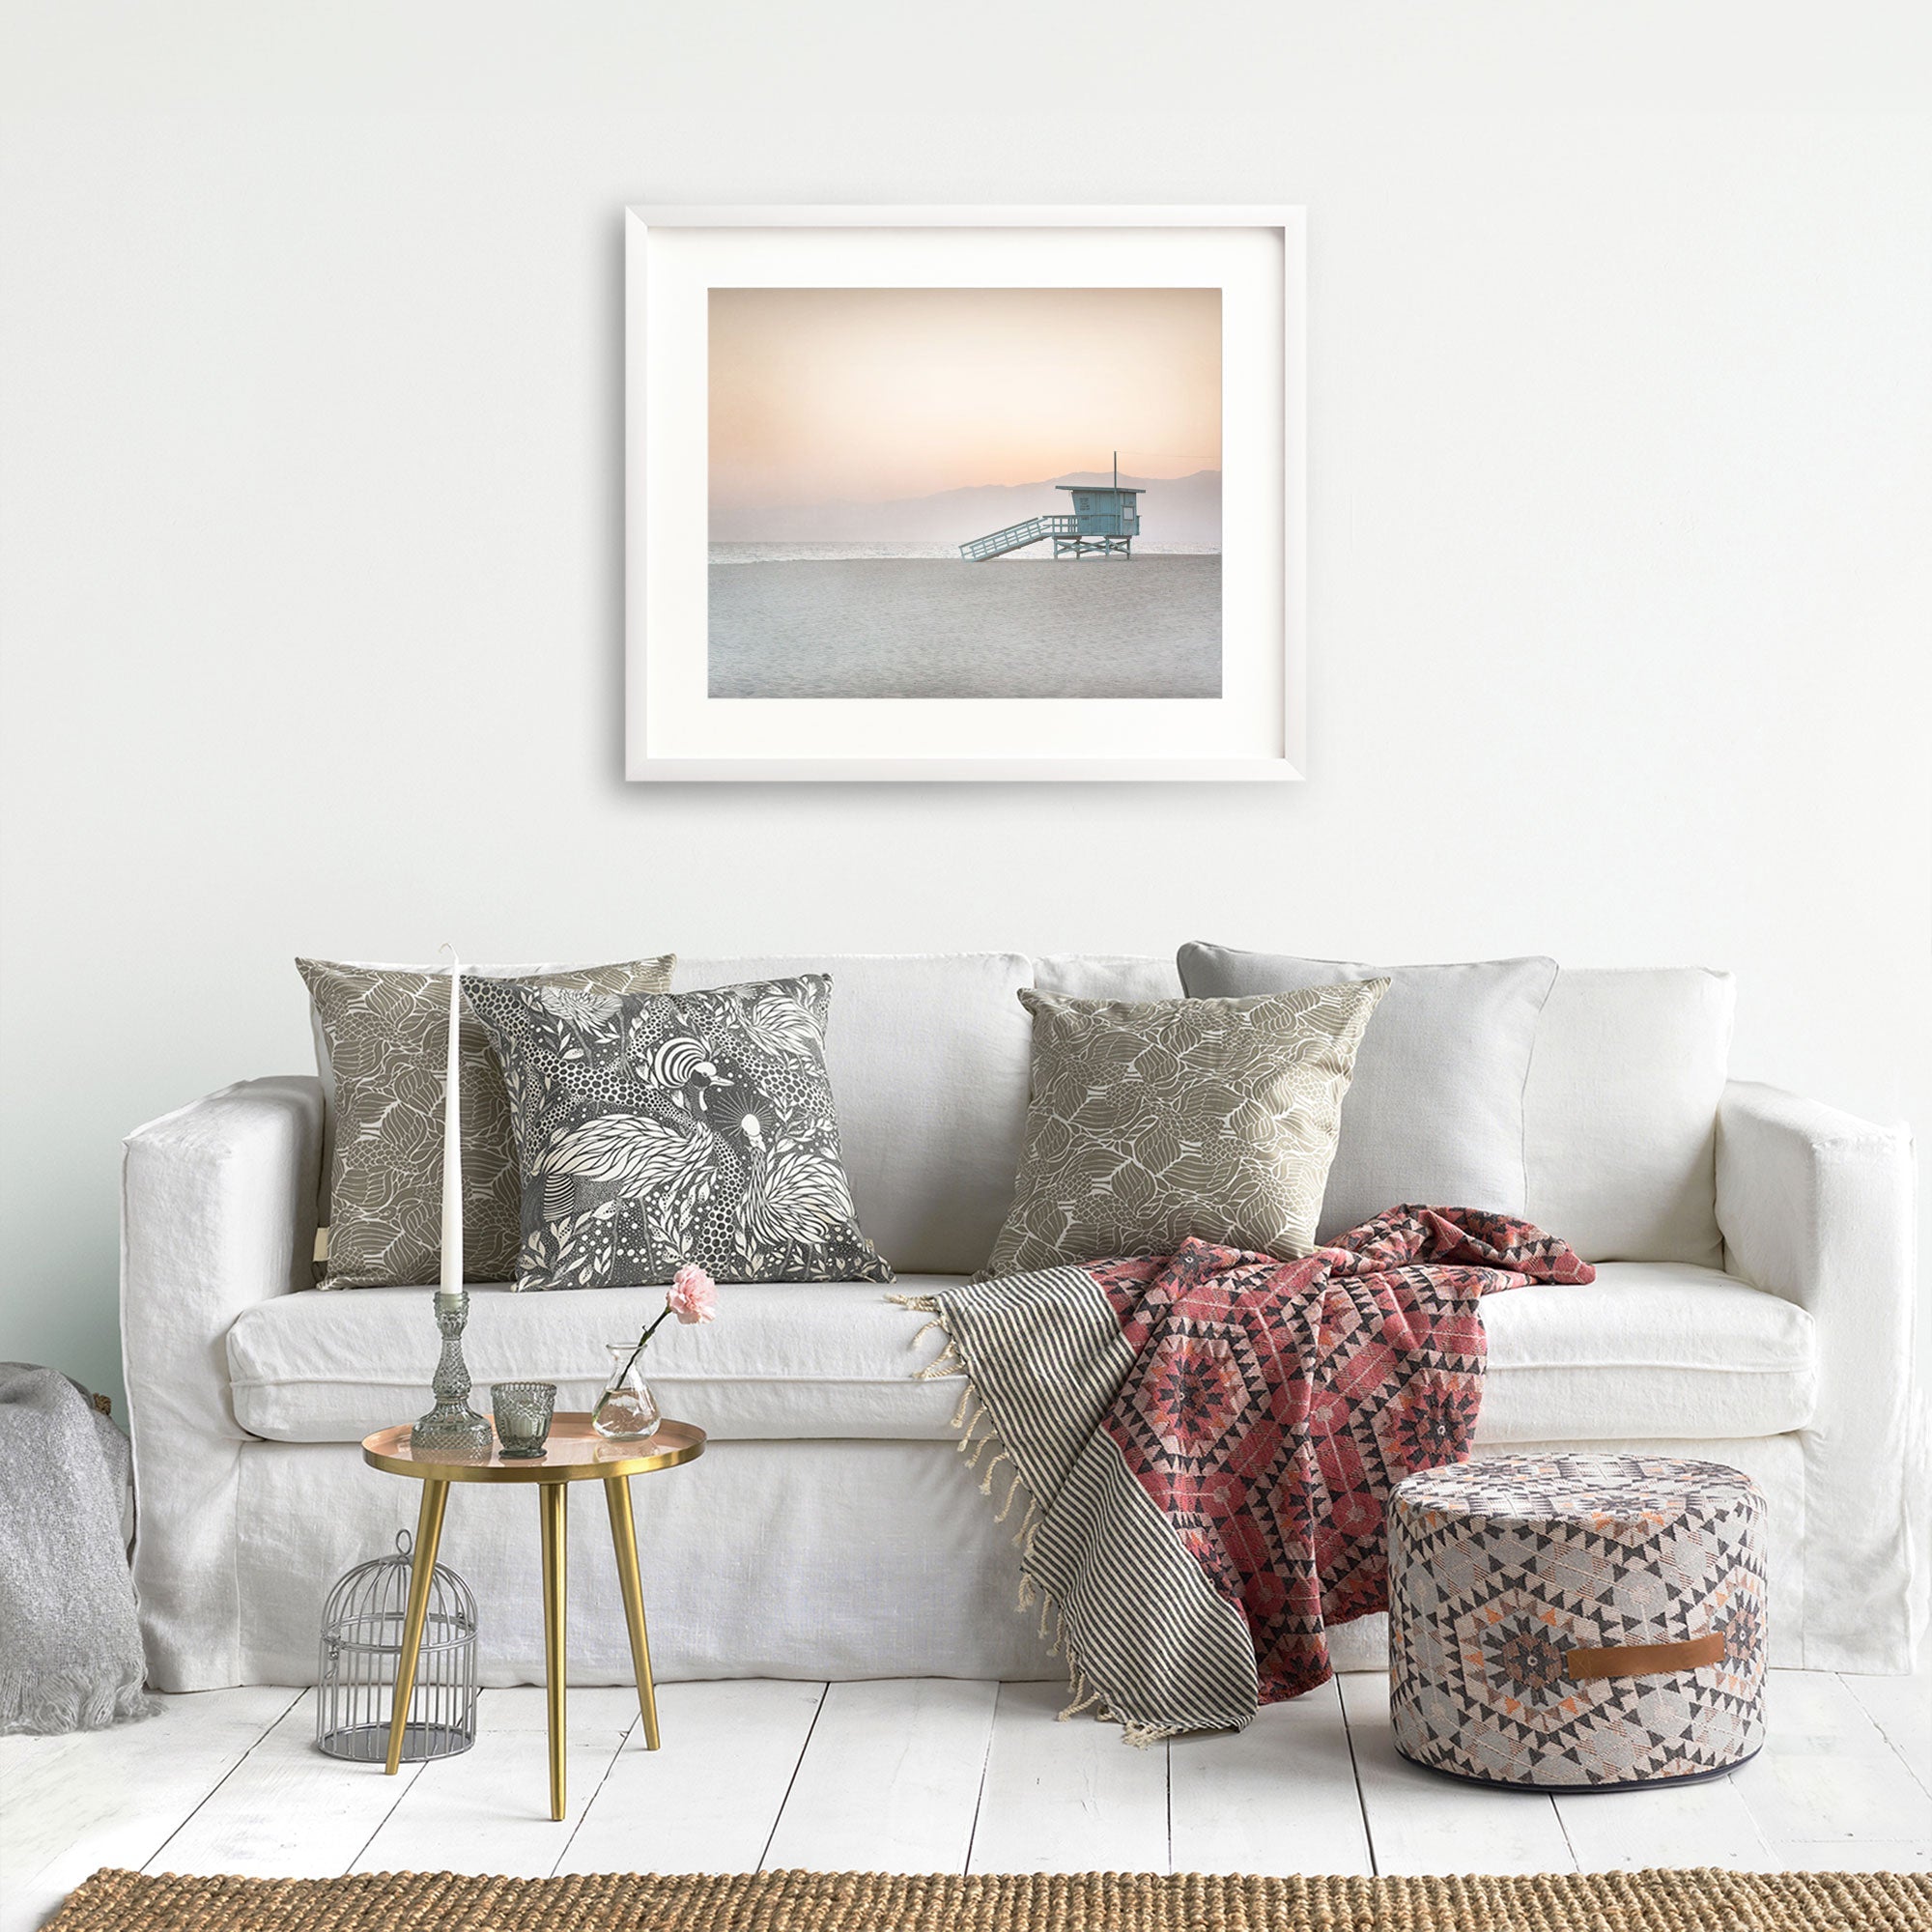 A cozy living room scene with a white sofa adorned with decorative pillows, a red patterned throw blanket, and a small table with vases and books. A tranquil Pink Coastal Print, &#39;Lifeguard Tower&#39; photograph of Venice hangs on the wall from Offley Green.